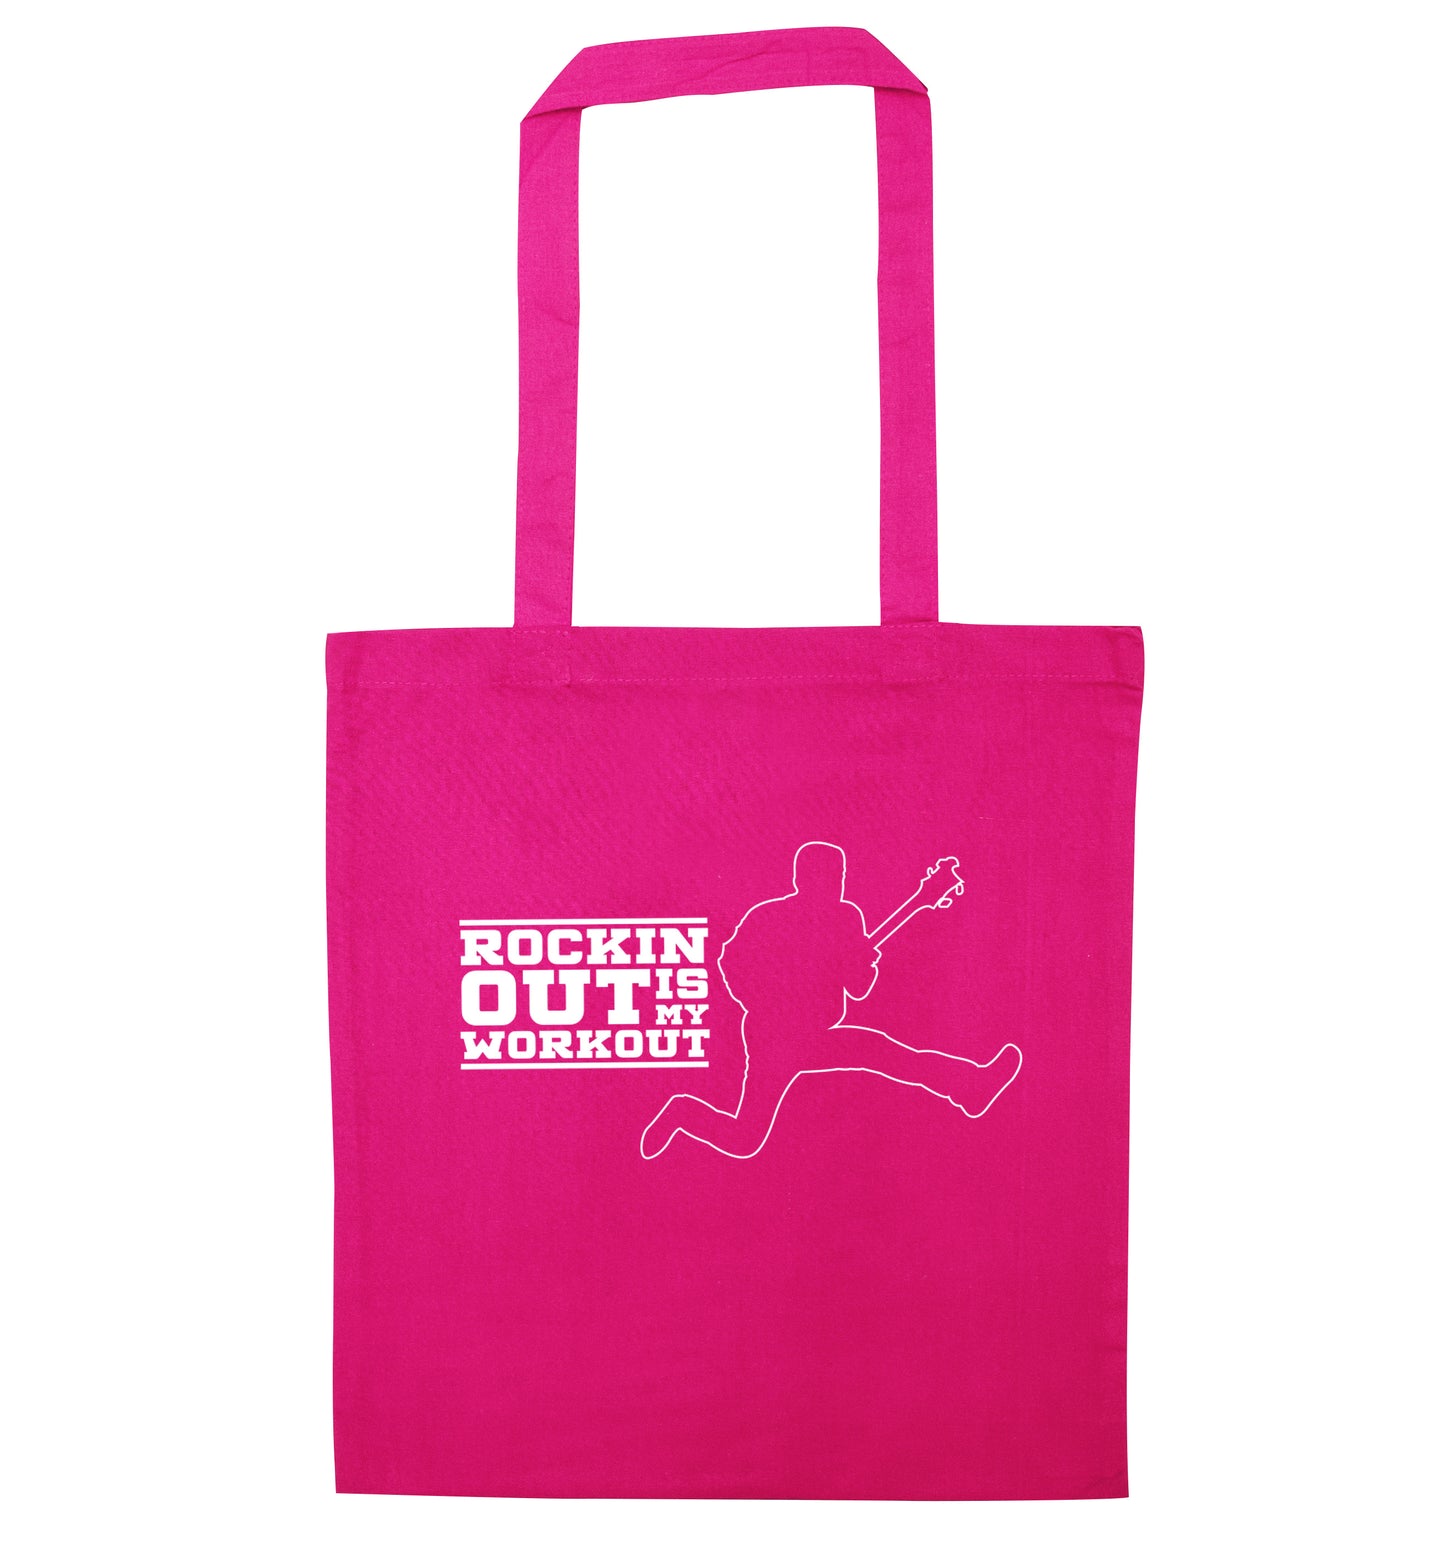 Rockin out is my workout pink tote bag